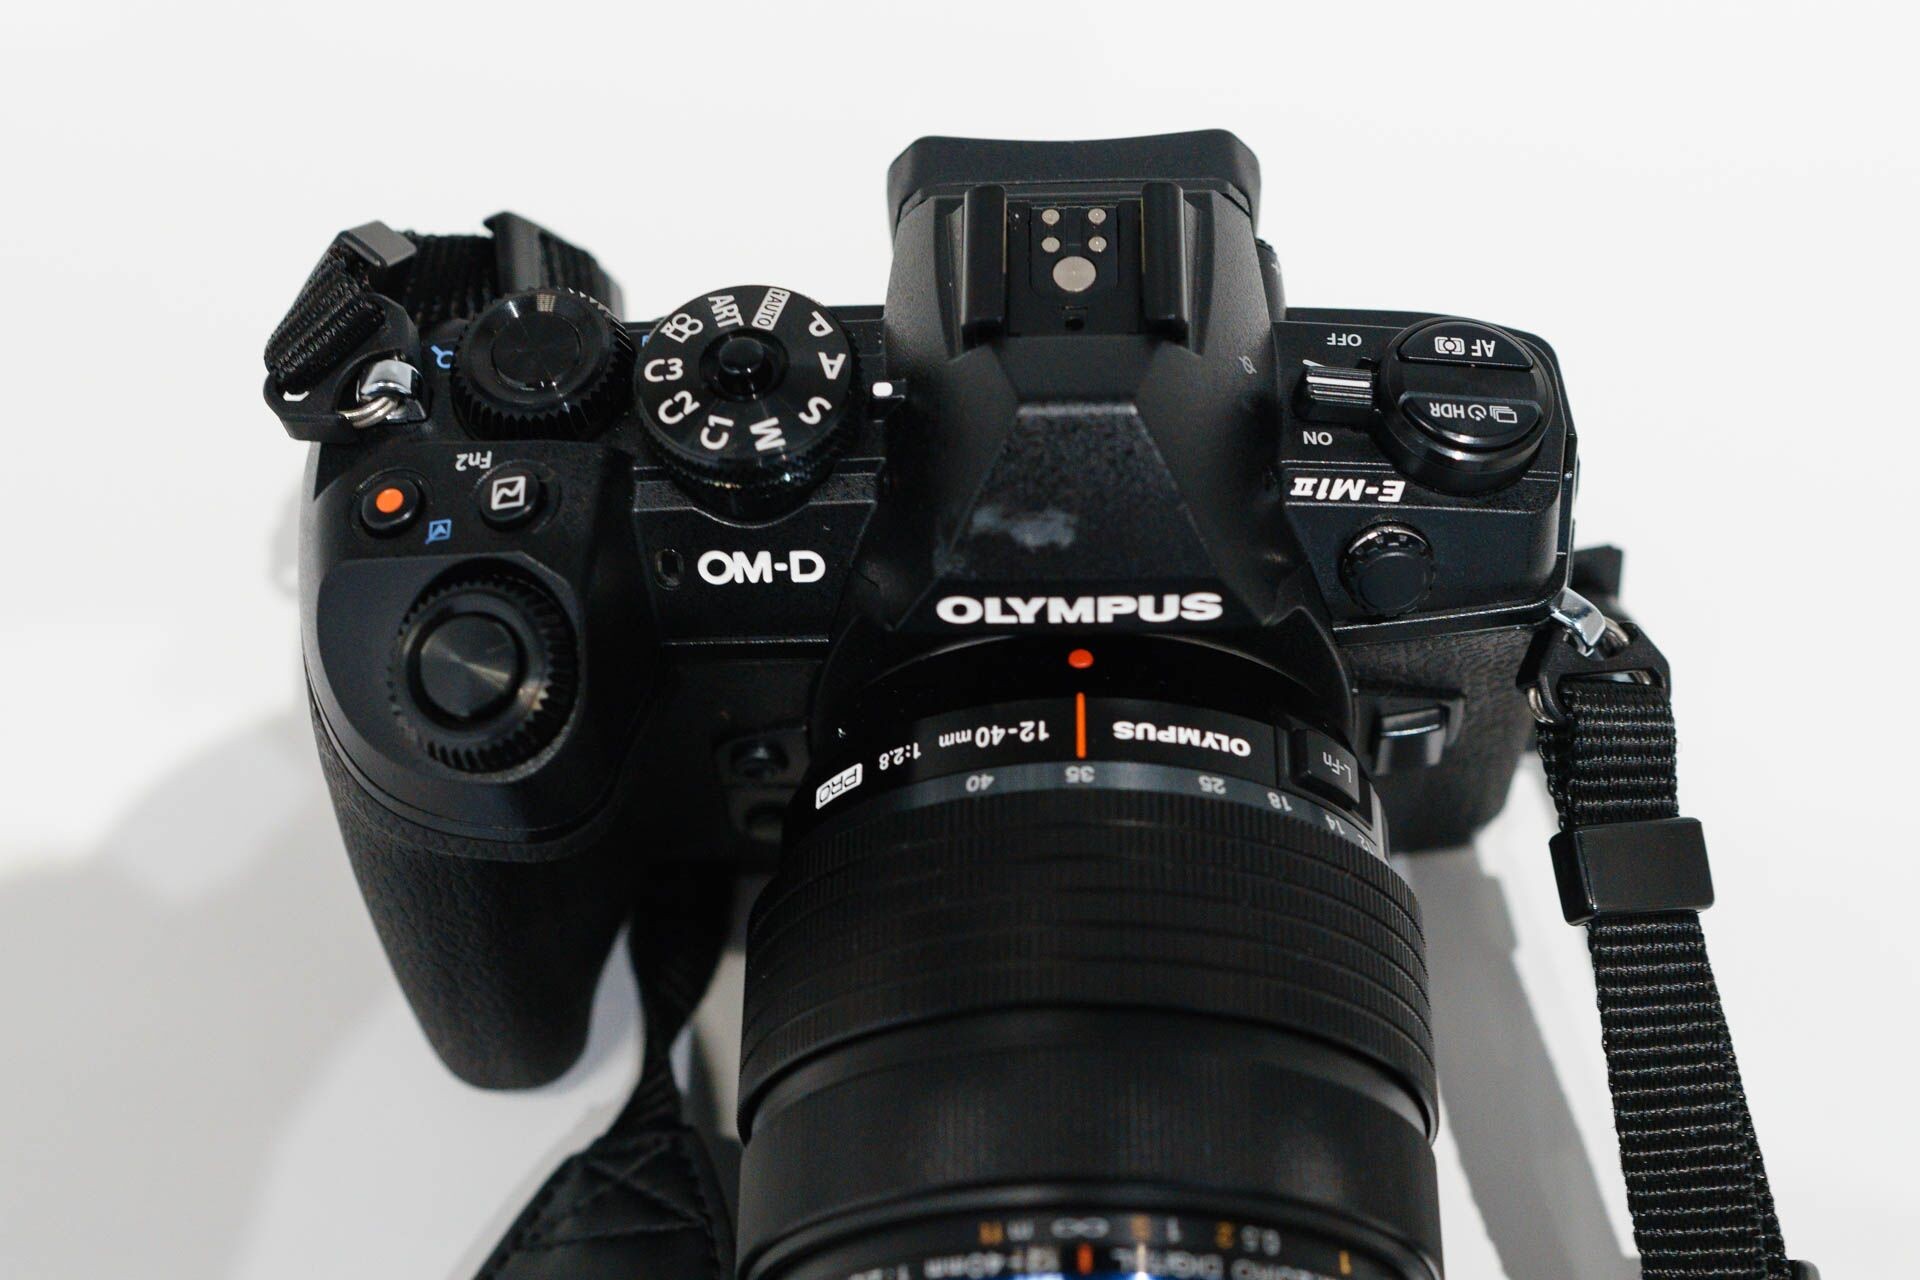 Olympus yesterday announced their brand new OM-D E-M1 Mark II Micro Four Thirds camera.